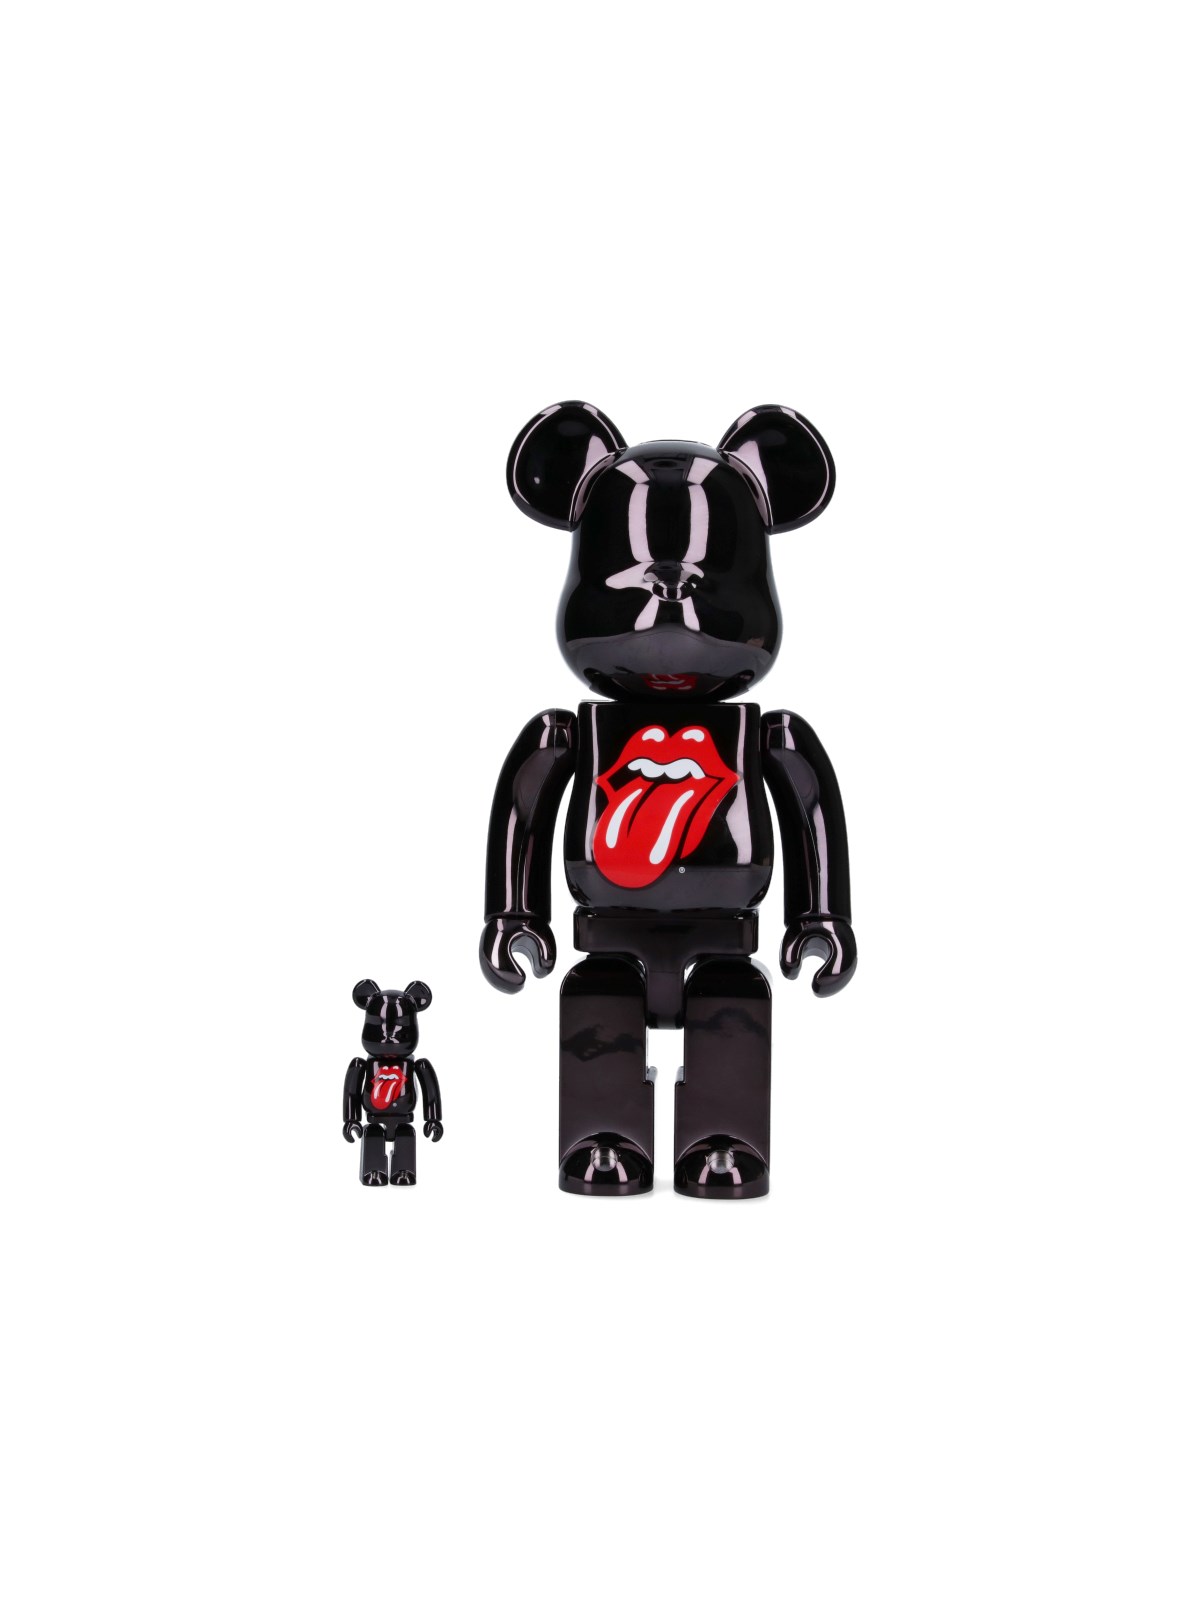 Medicom Toy Be@rbrick "the Rolling Stones" In Black  